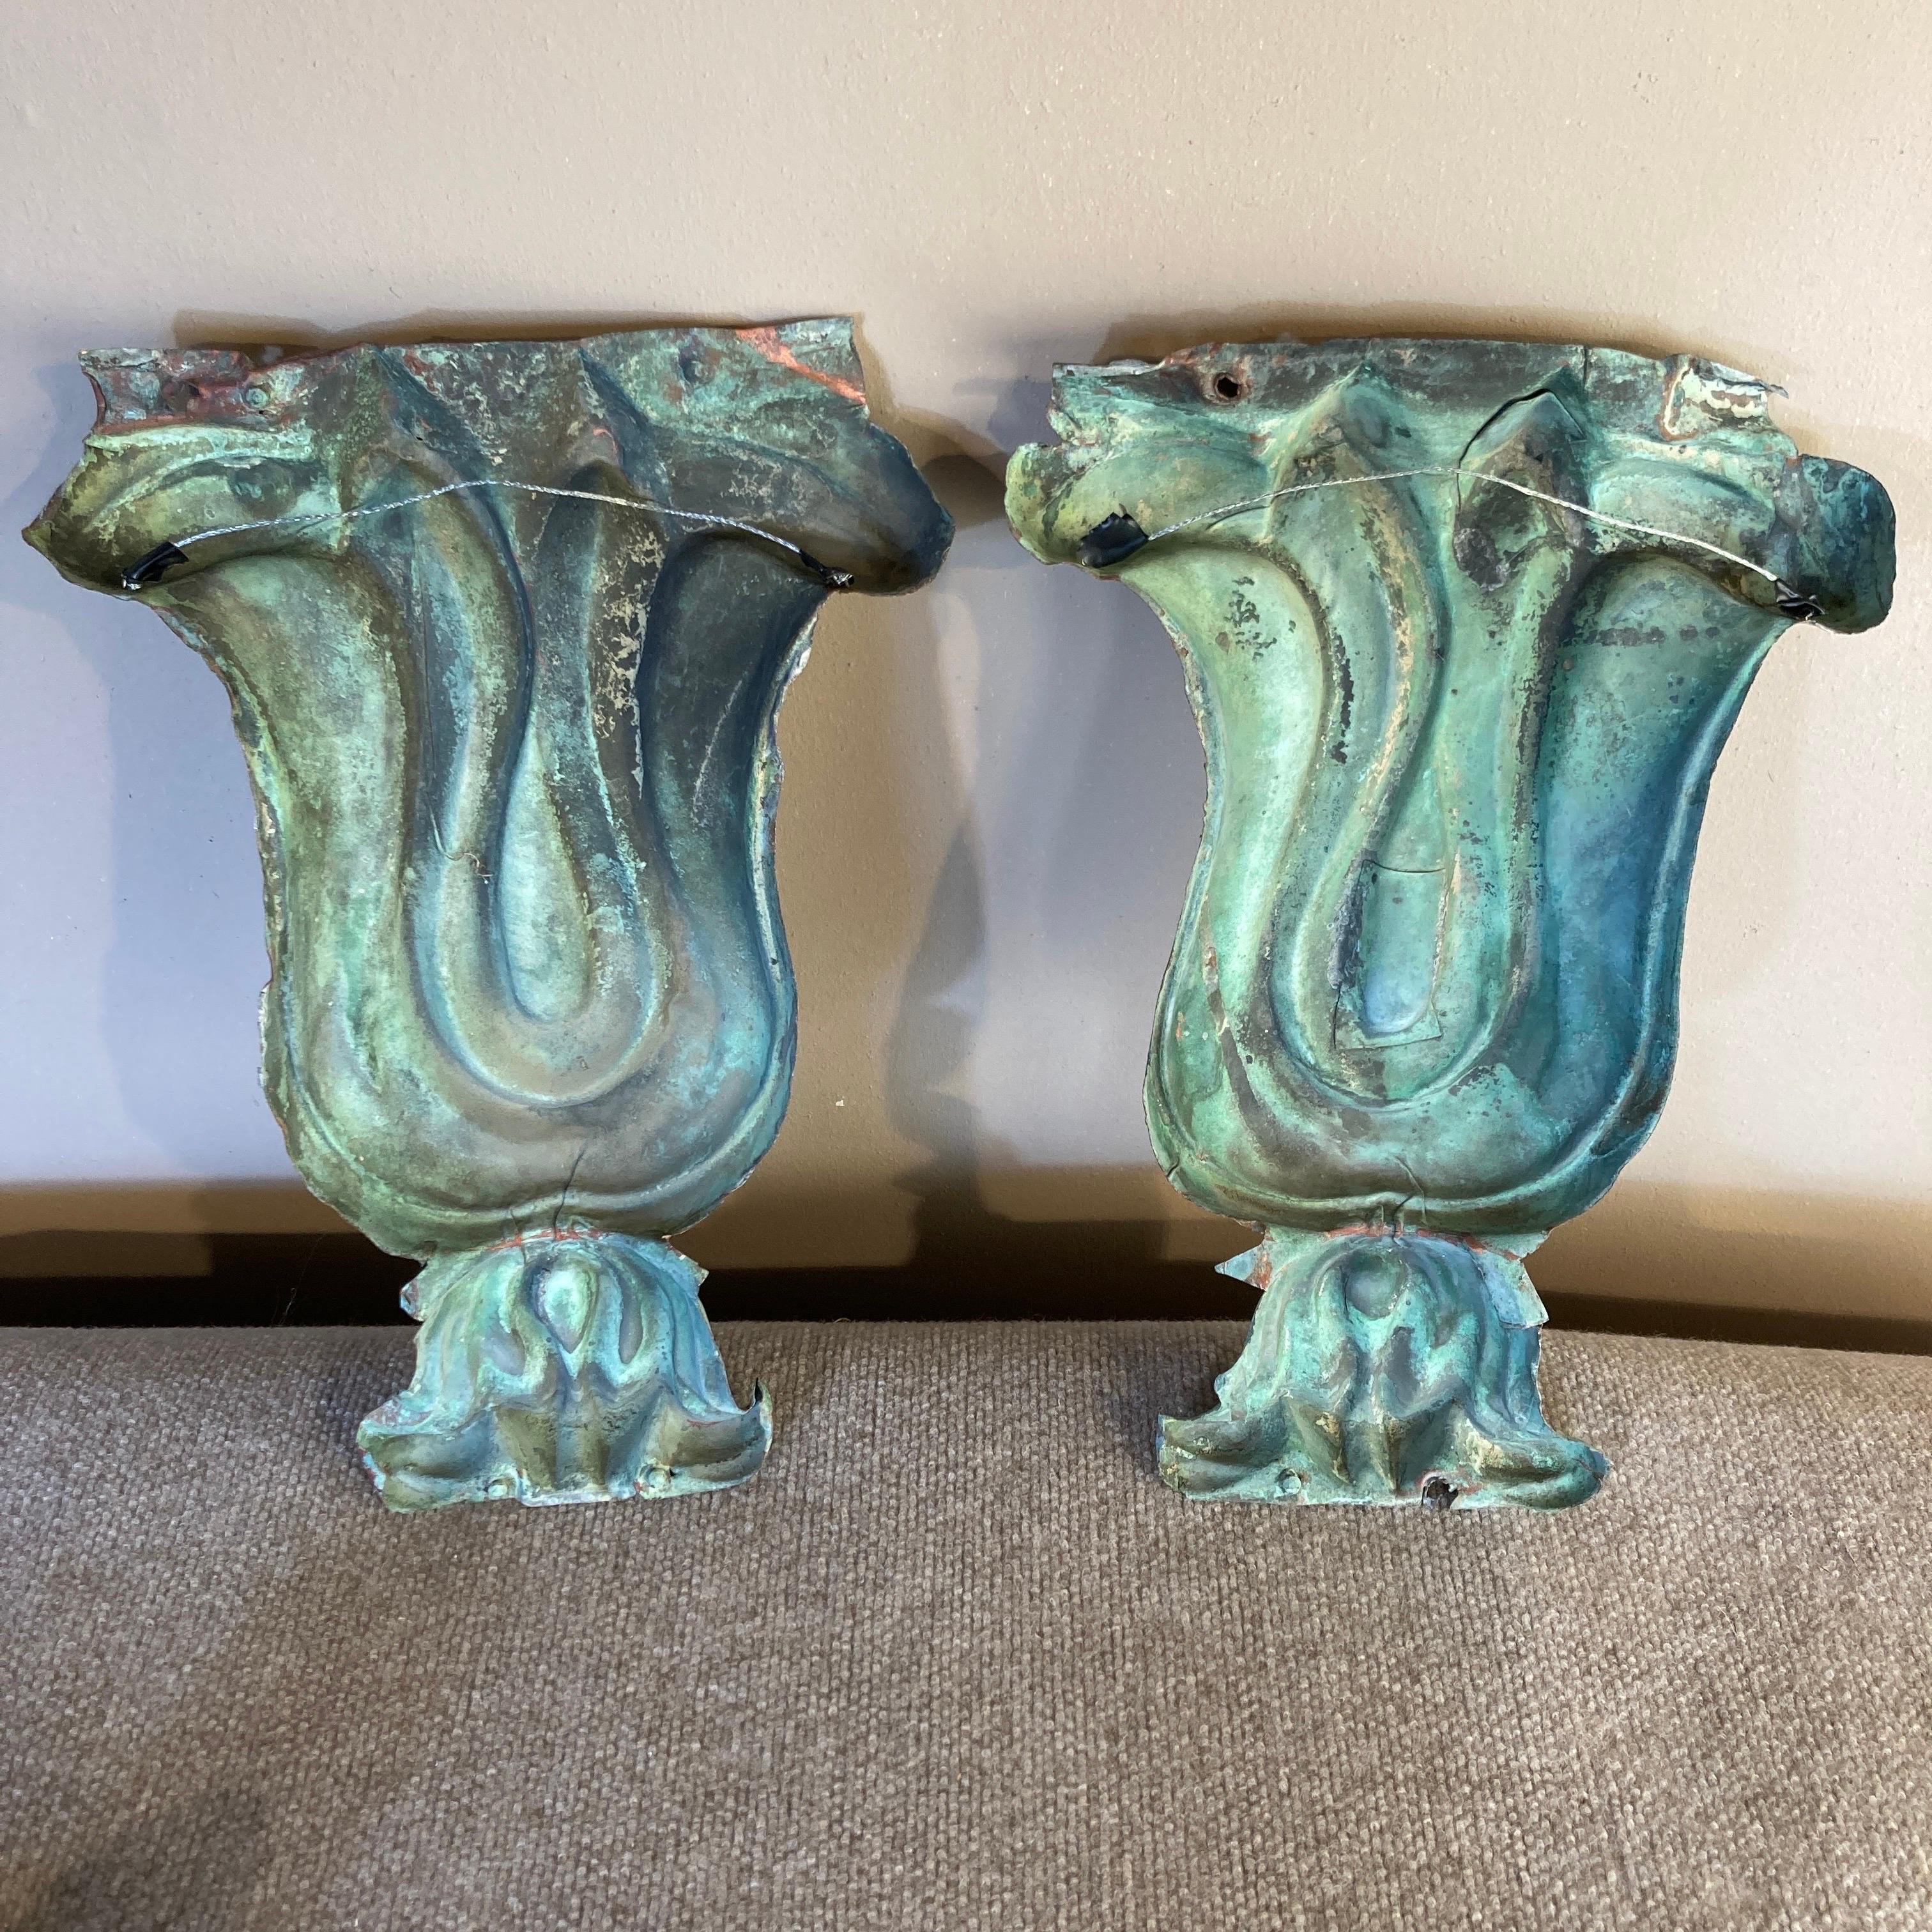 19th Century American Molded Verdigris Copper Urn Architectural Ornaments Pair For Sale 4